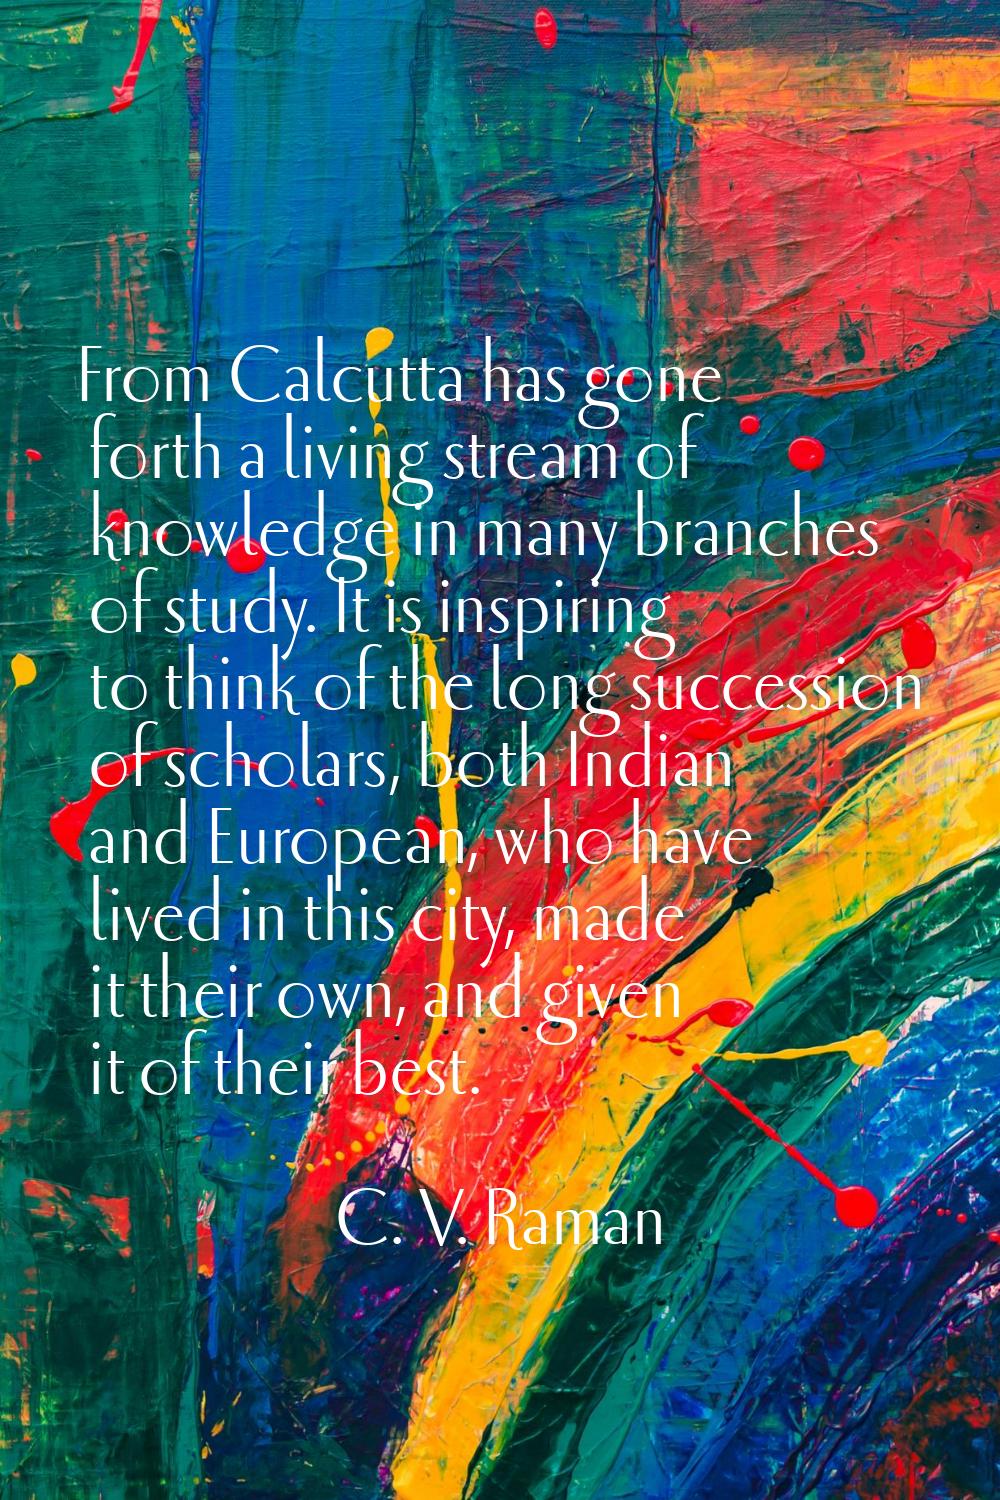 From Calcutta has gone forth a living stream of knowledge in many branches of study. It is inspirin